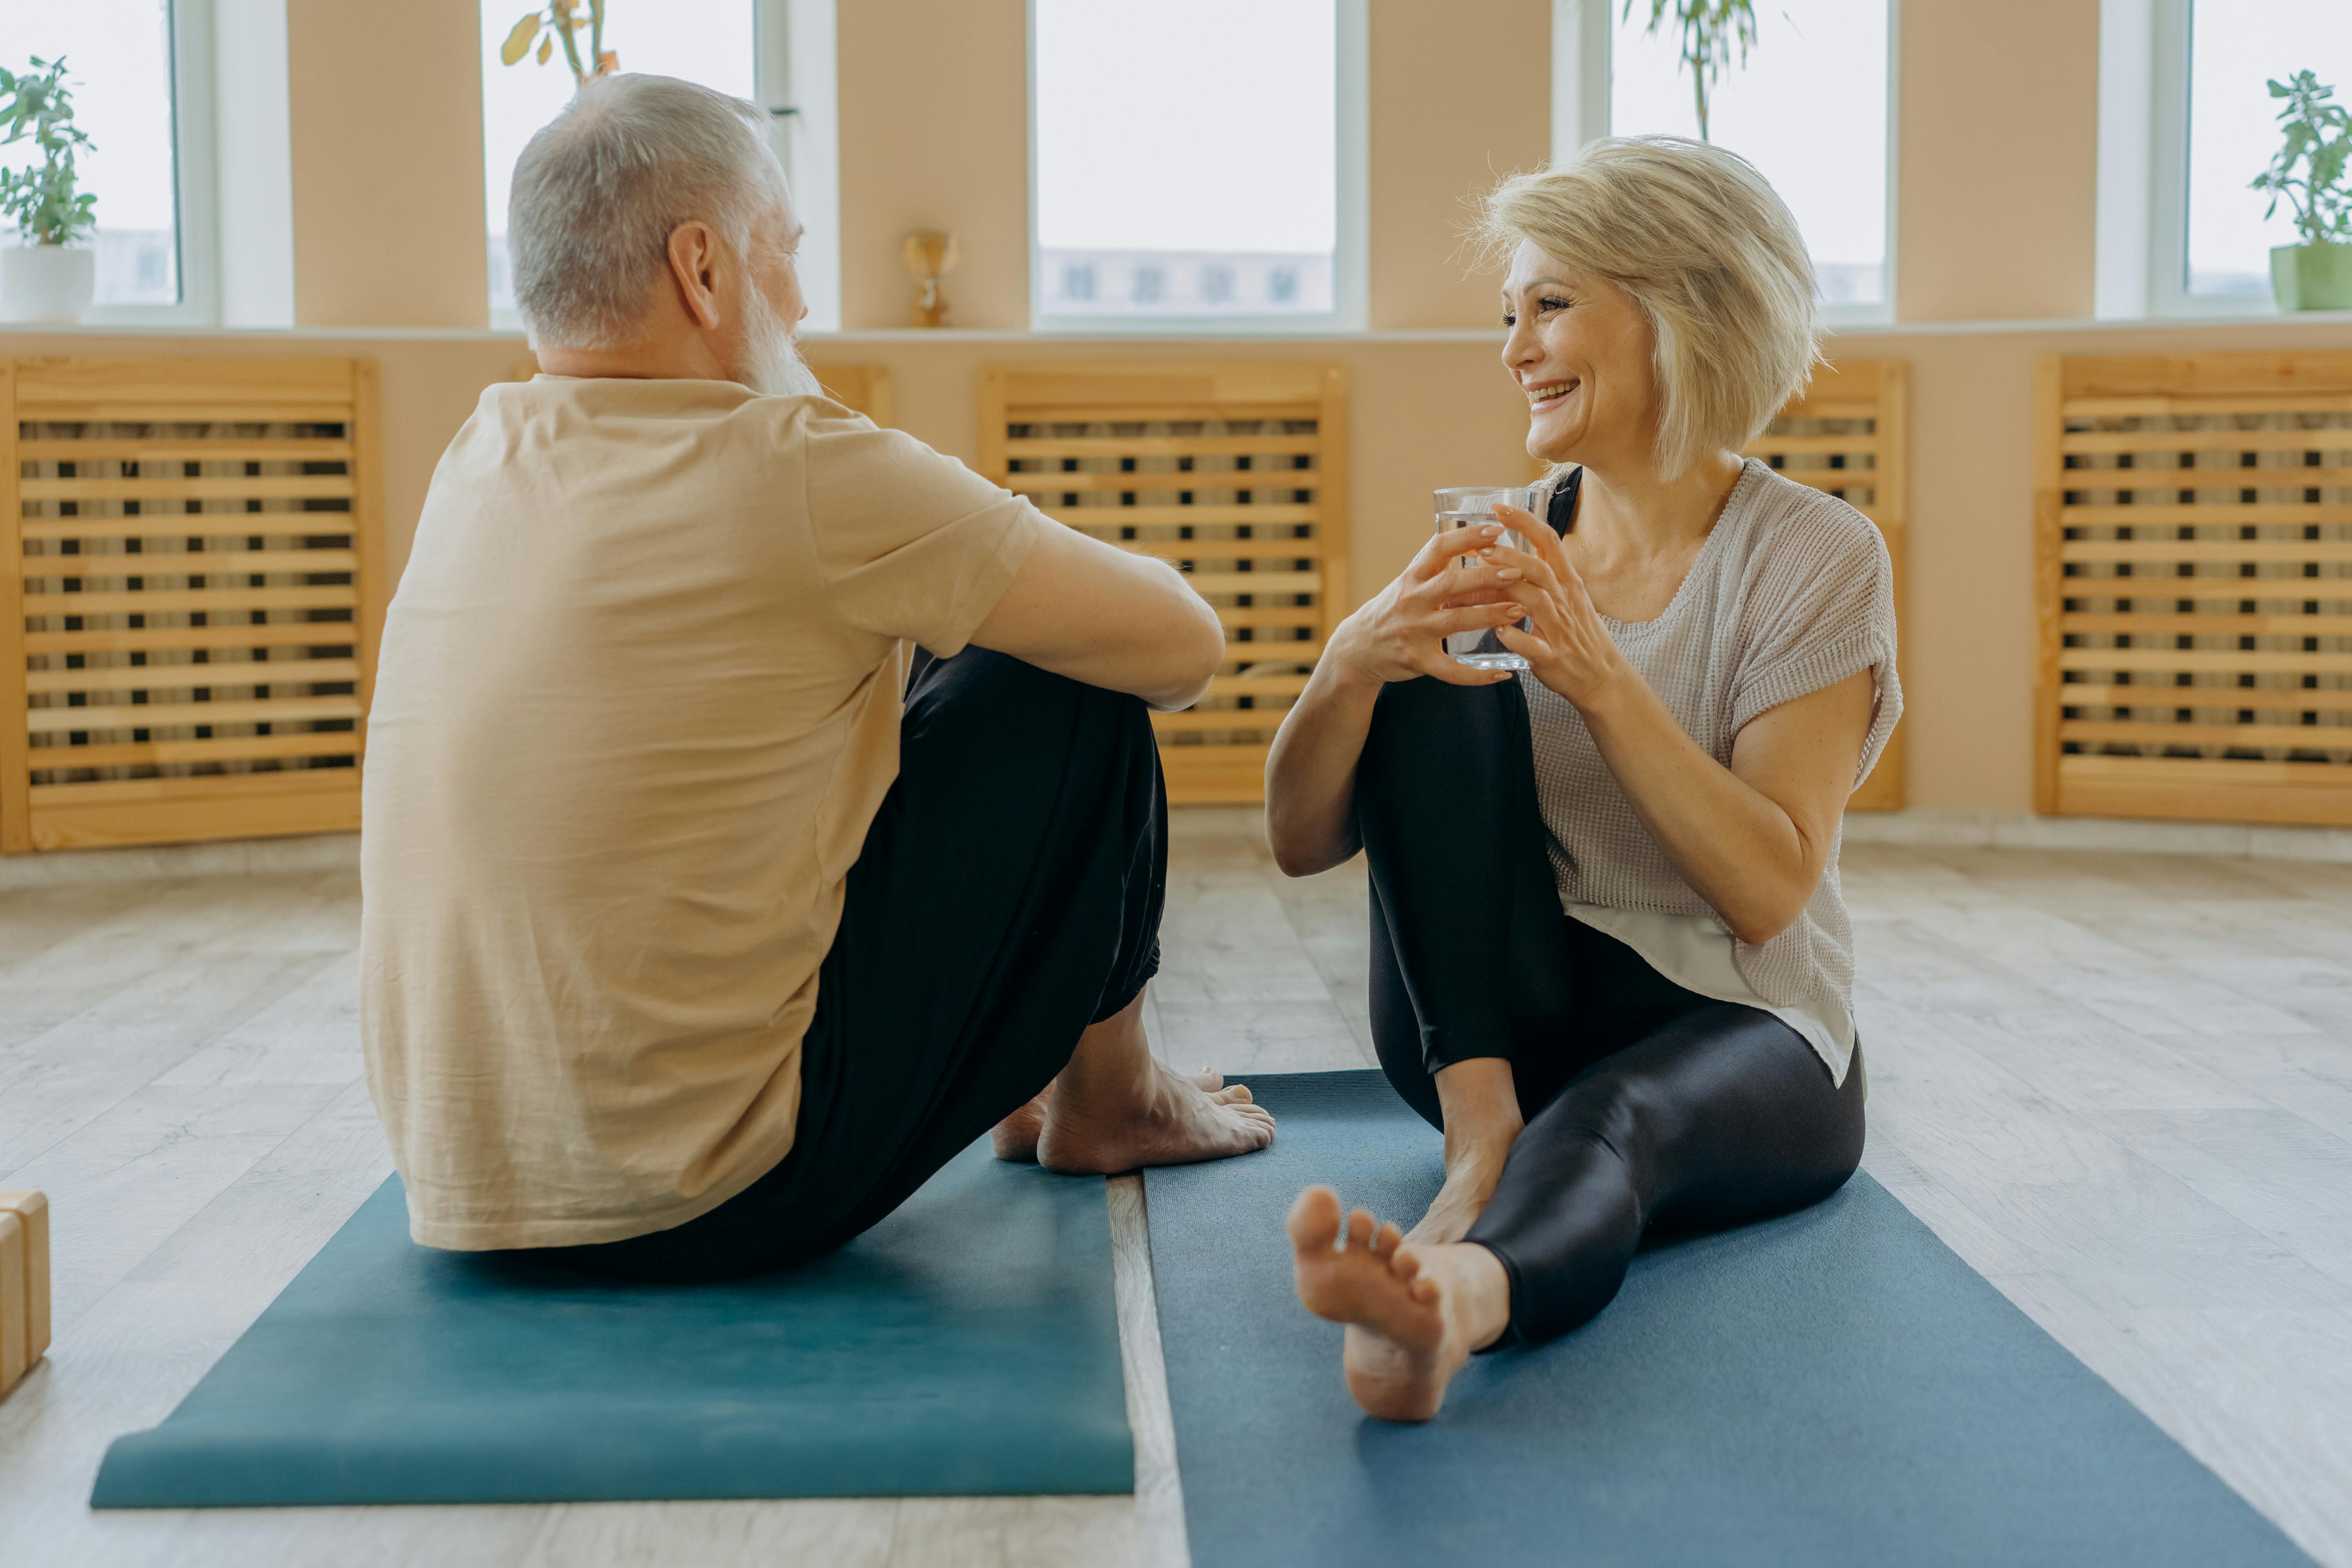 A happy man and woman talking after doing yoga | Source: Pexels